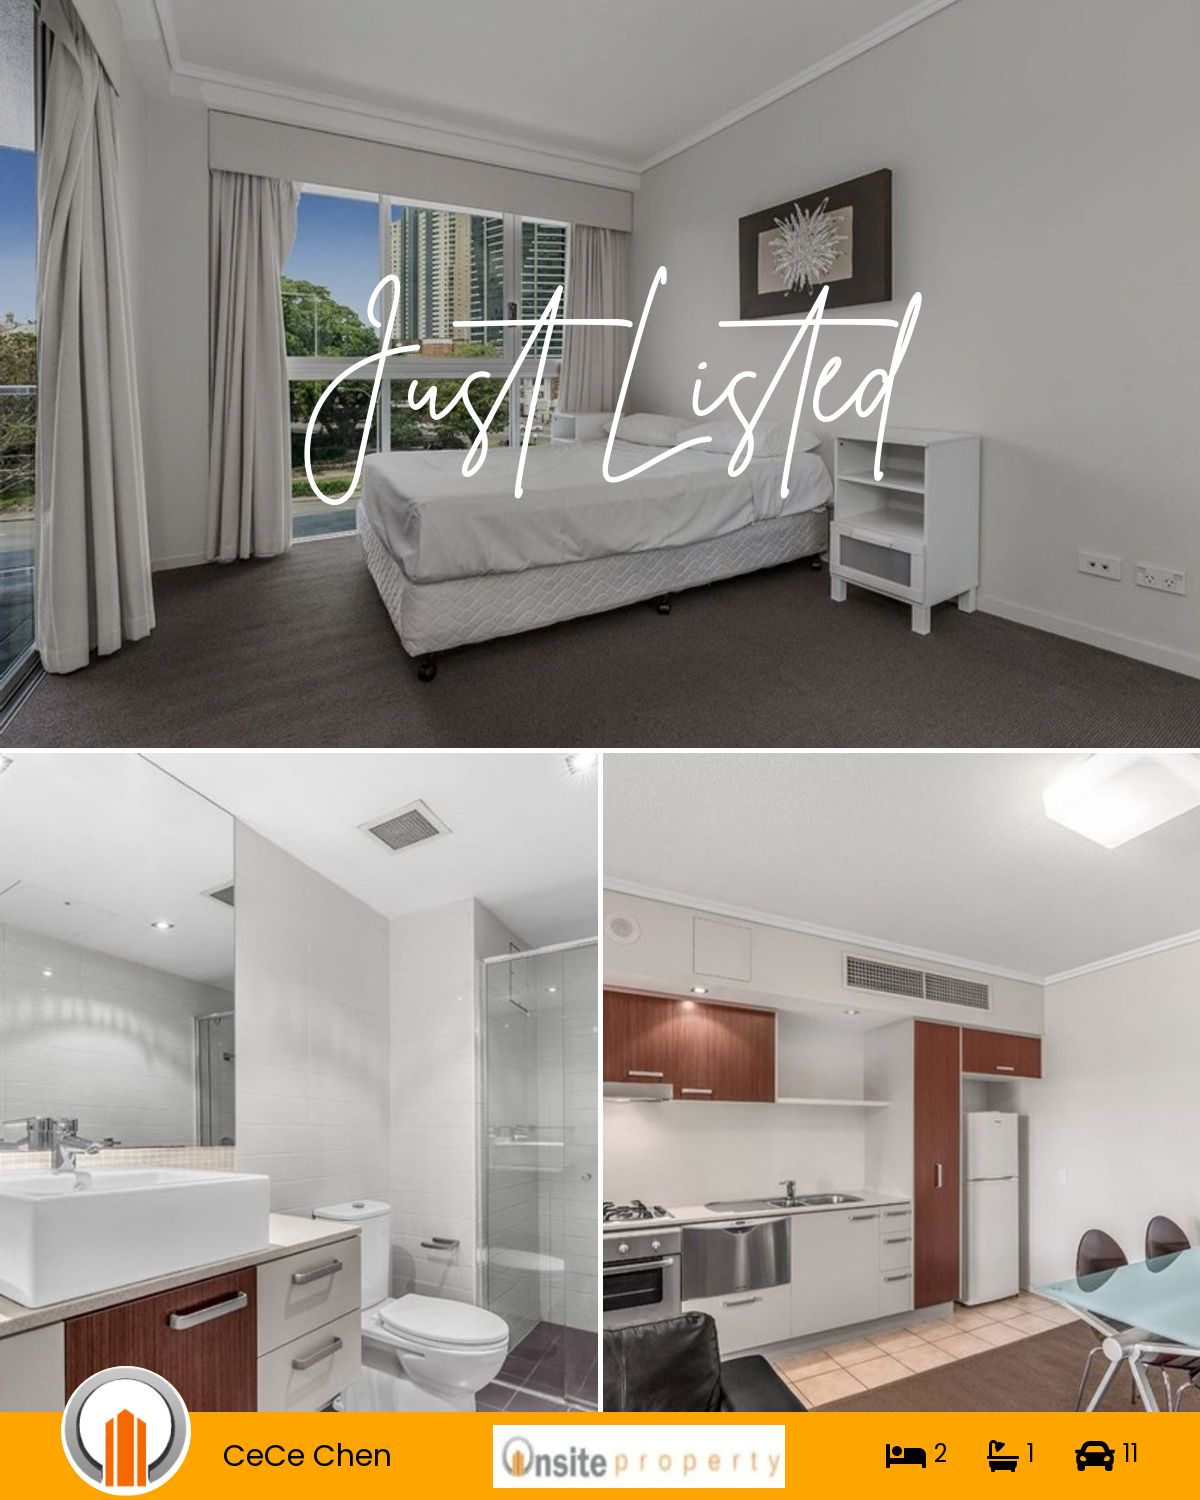 25/22 Barry Parade, Fortitude Valley, QLD 4006 | Realty.com.au